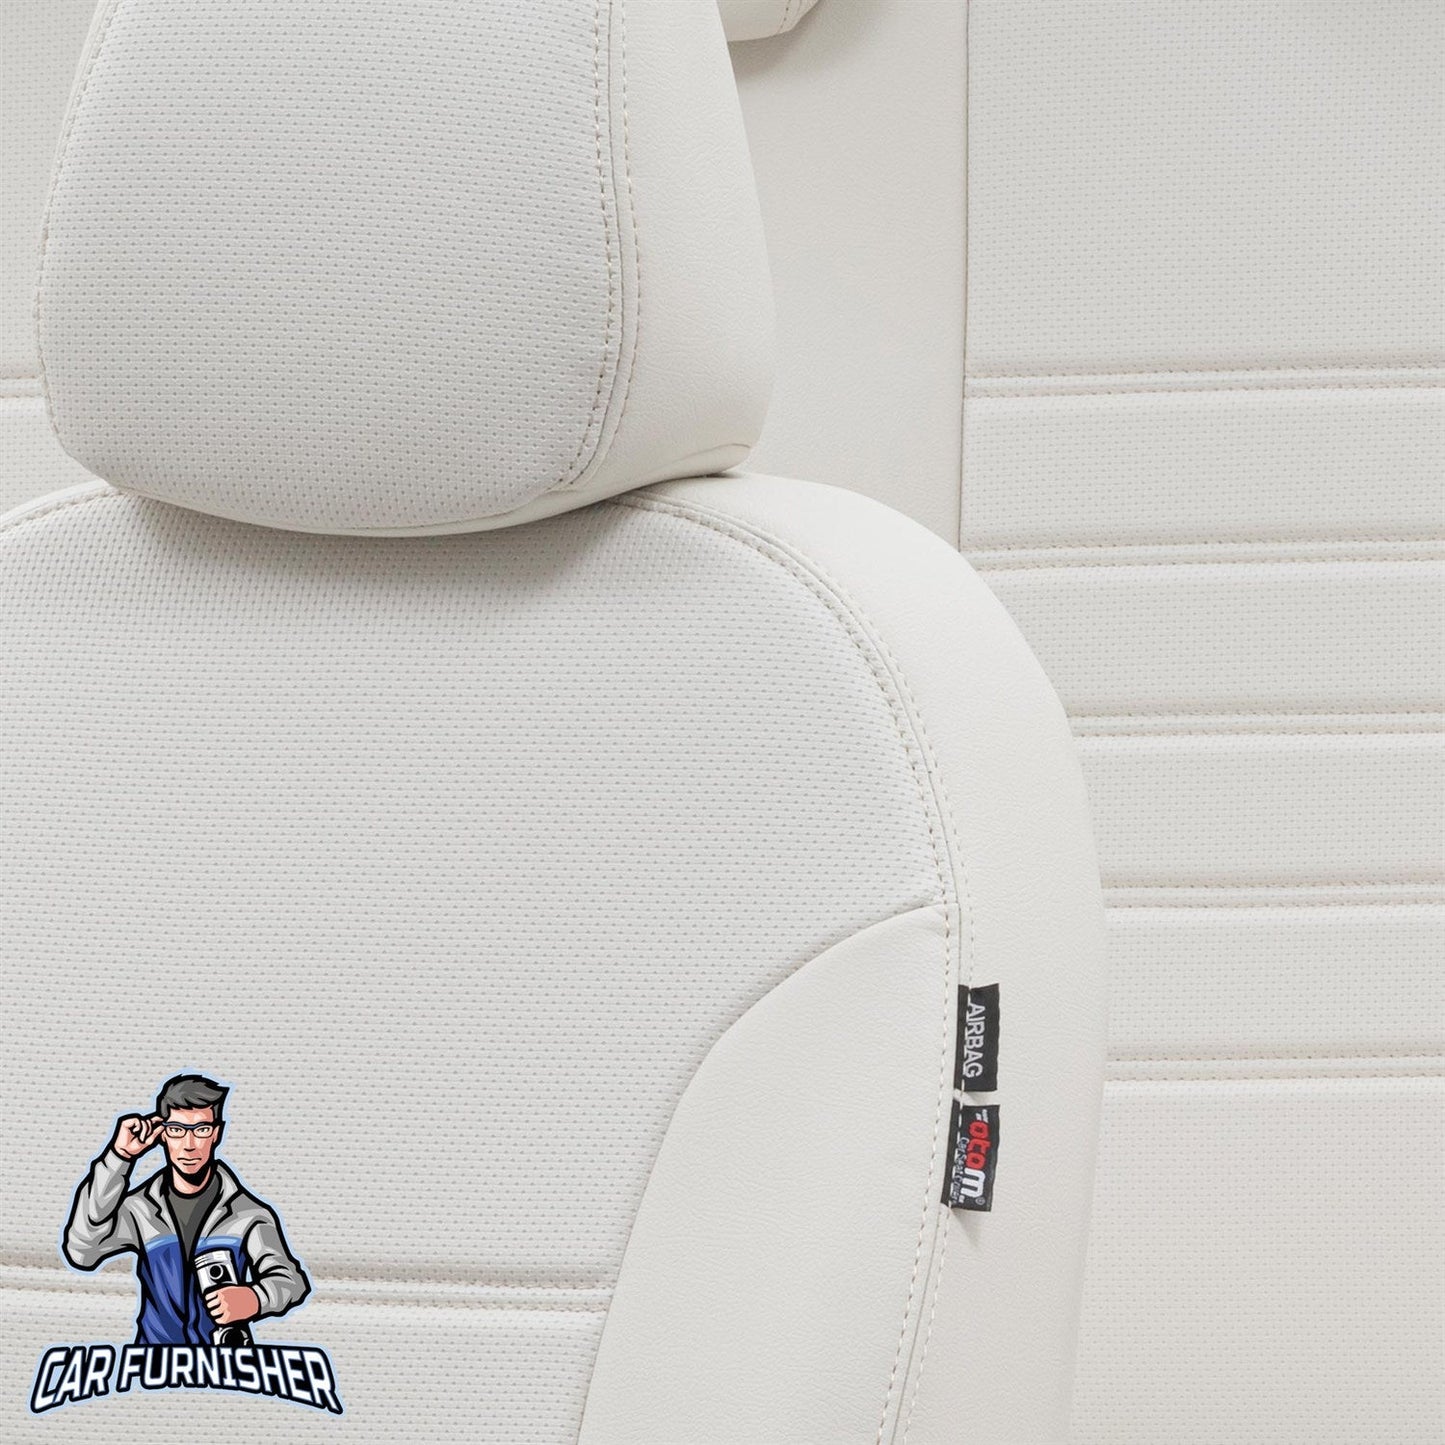 Nissan Qashqai Seat Covers New York Leather Design Ivory Leather